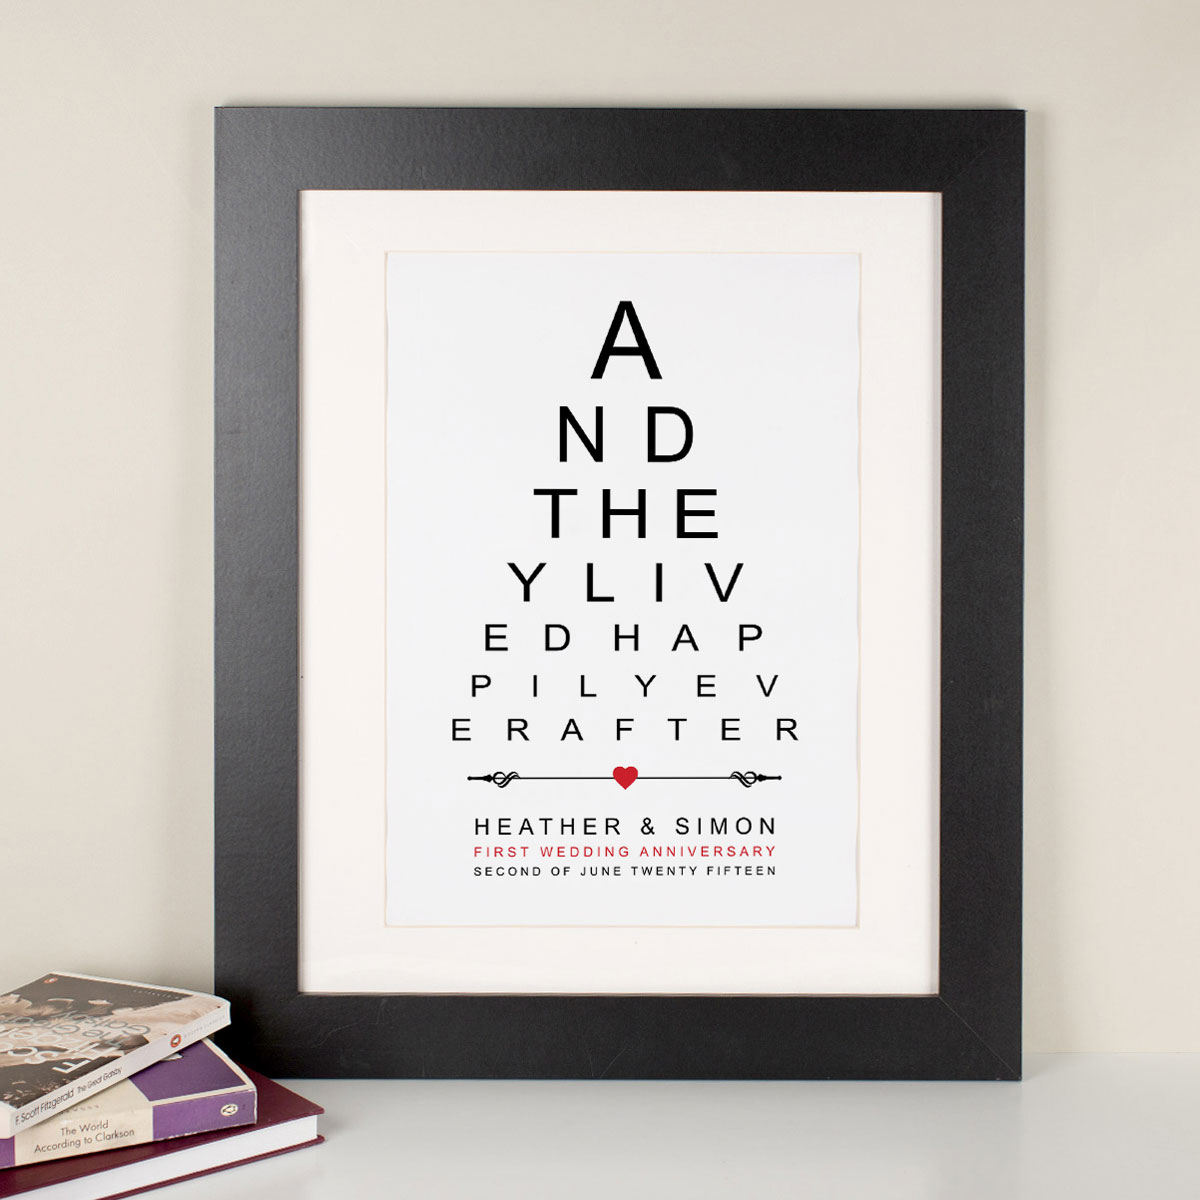 Personalised Framed Print - Happily Ever After